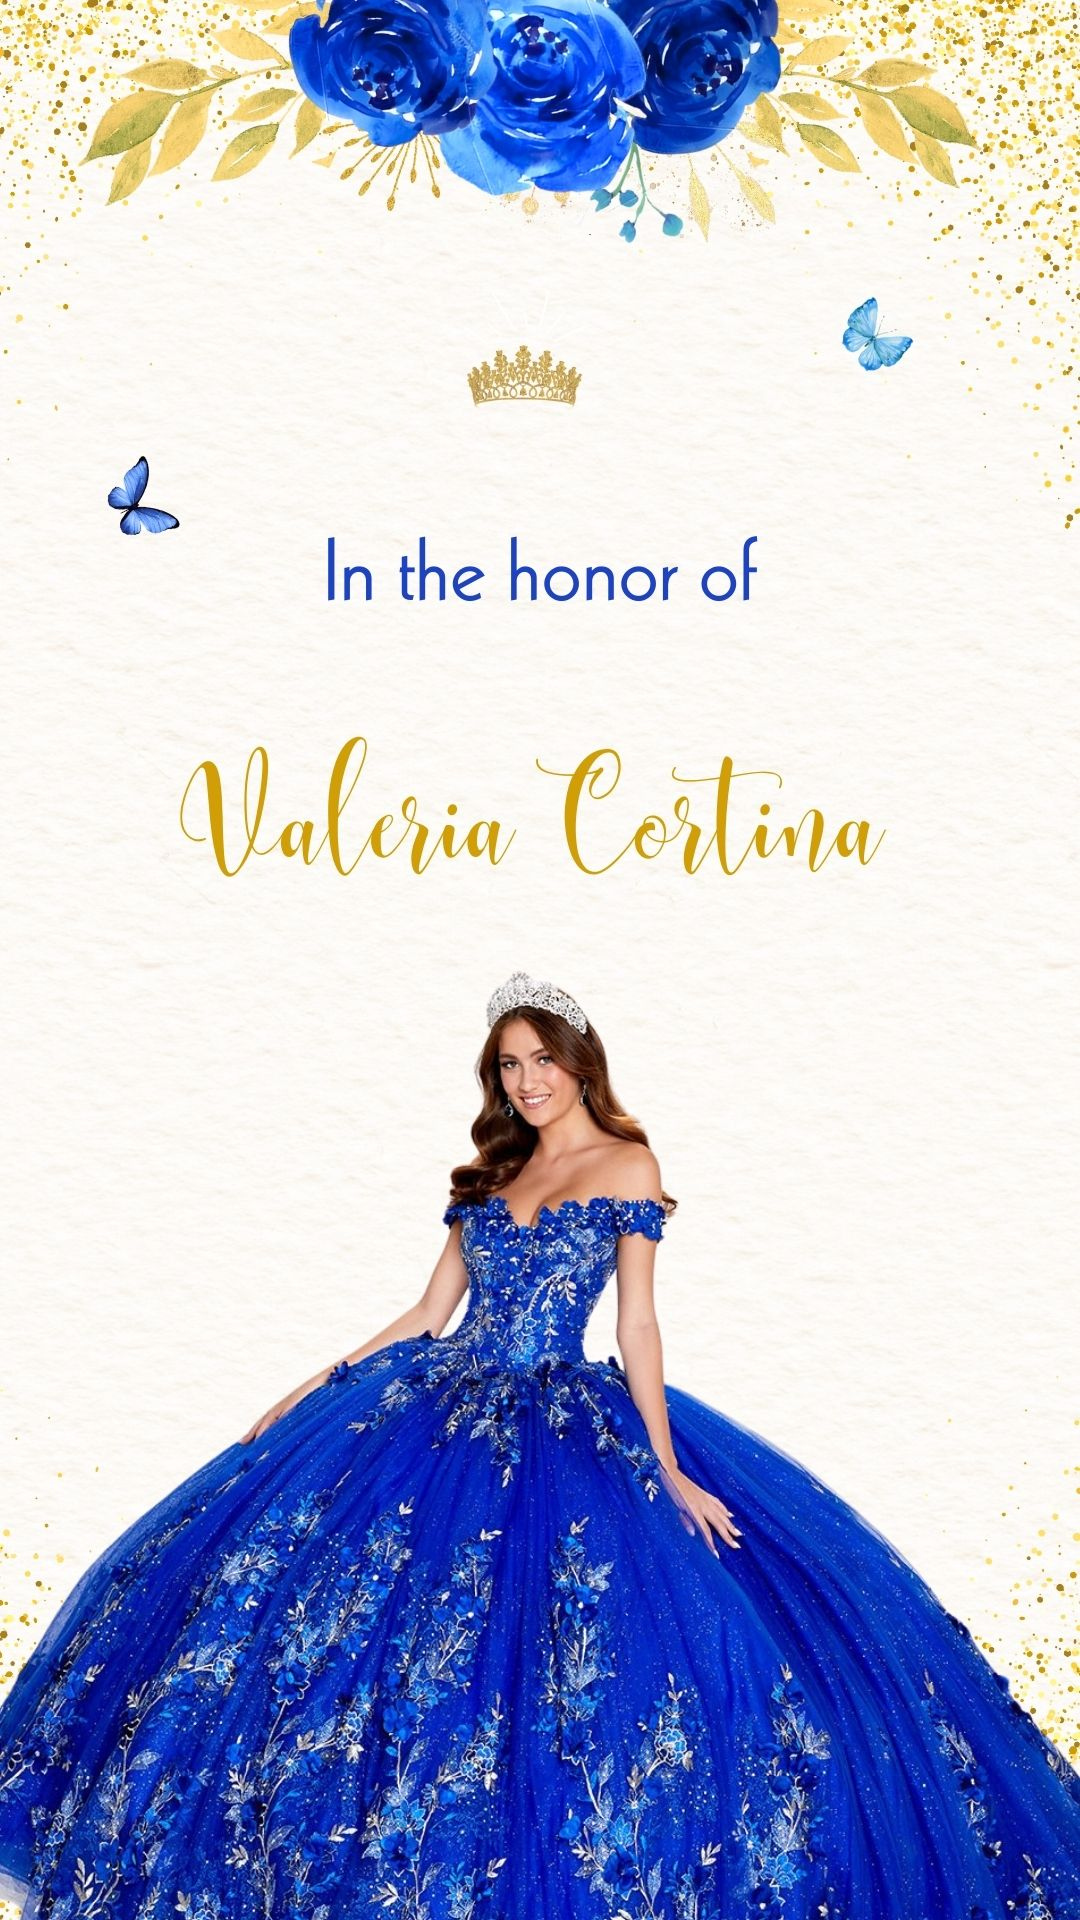 Quinceanera Royal Blue & Gold Video Invitation - Quinceanera Theme Royal Blue & Gold Digital Invite